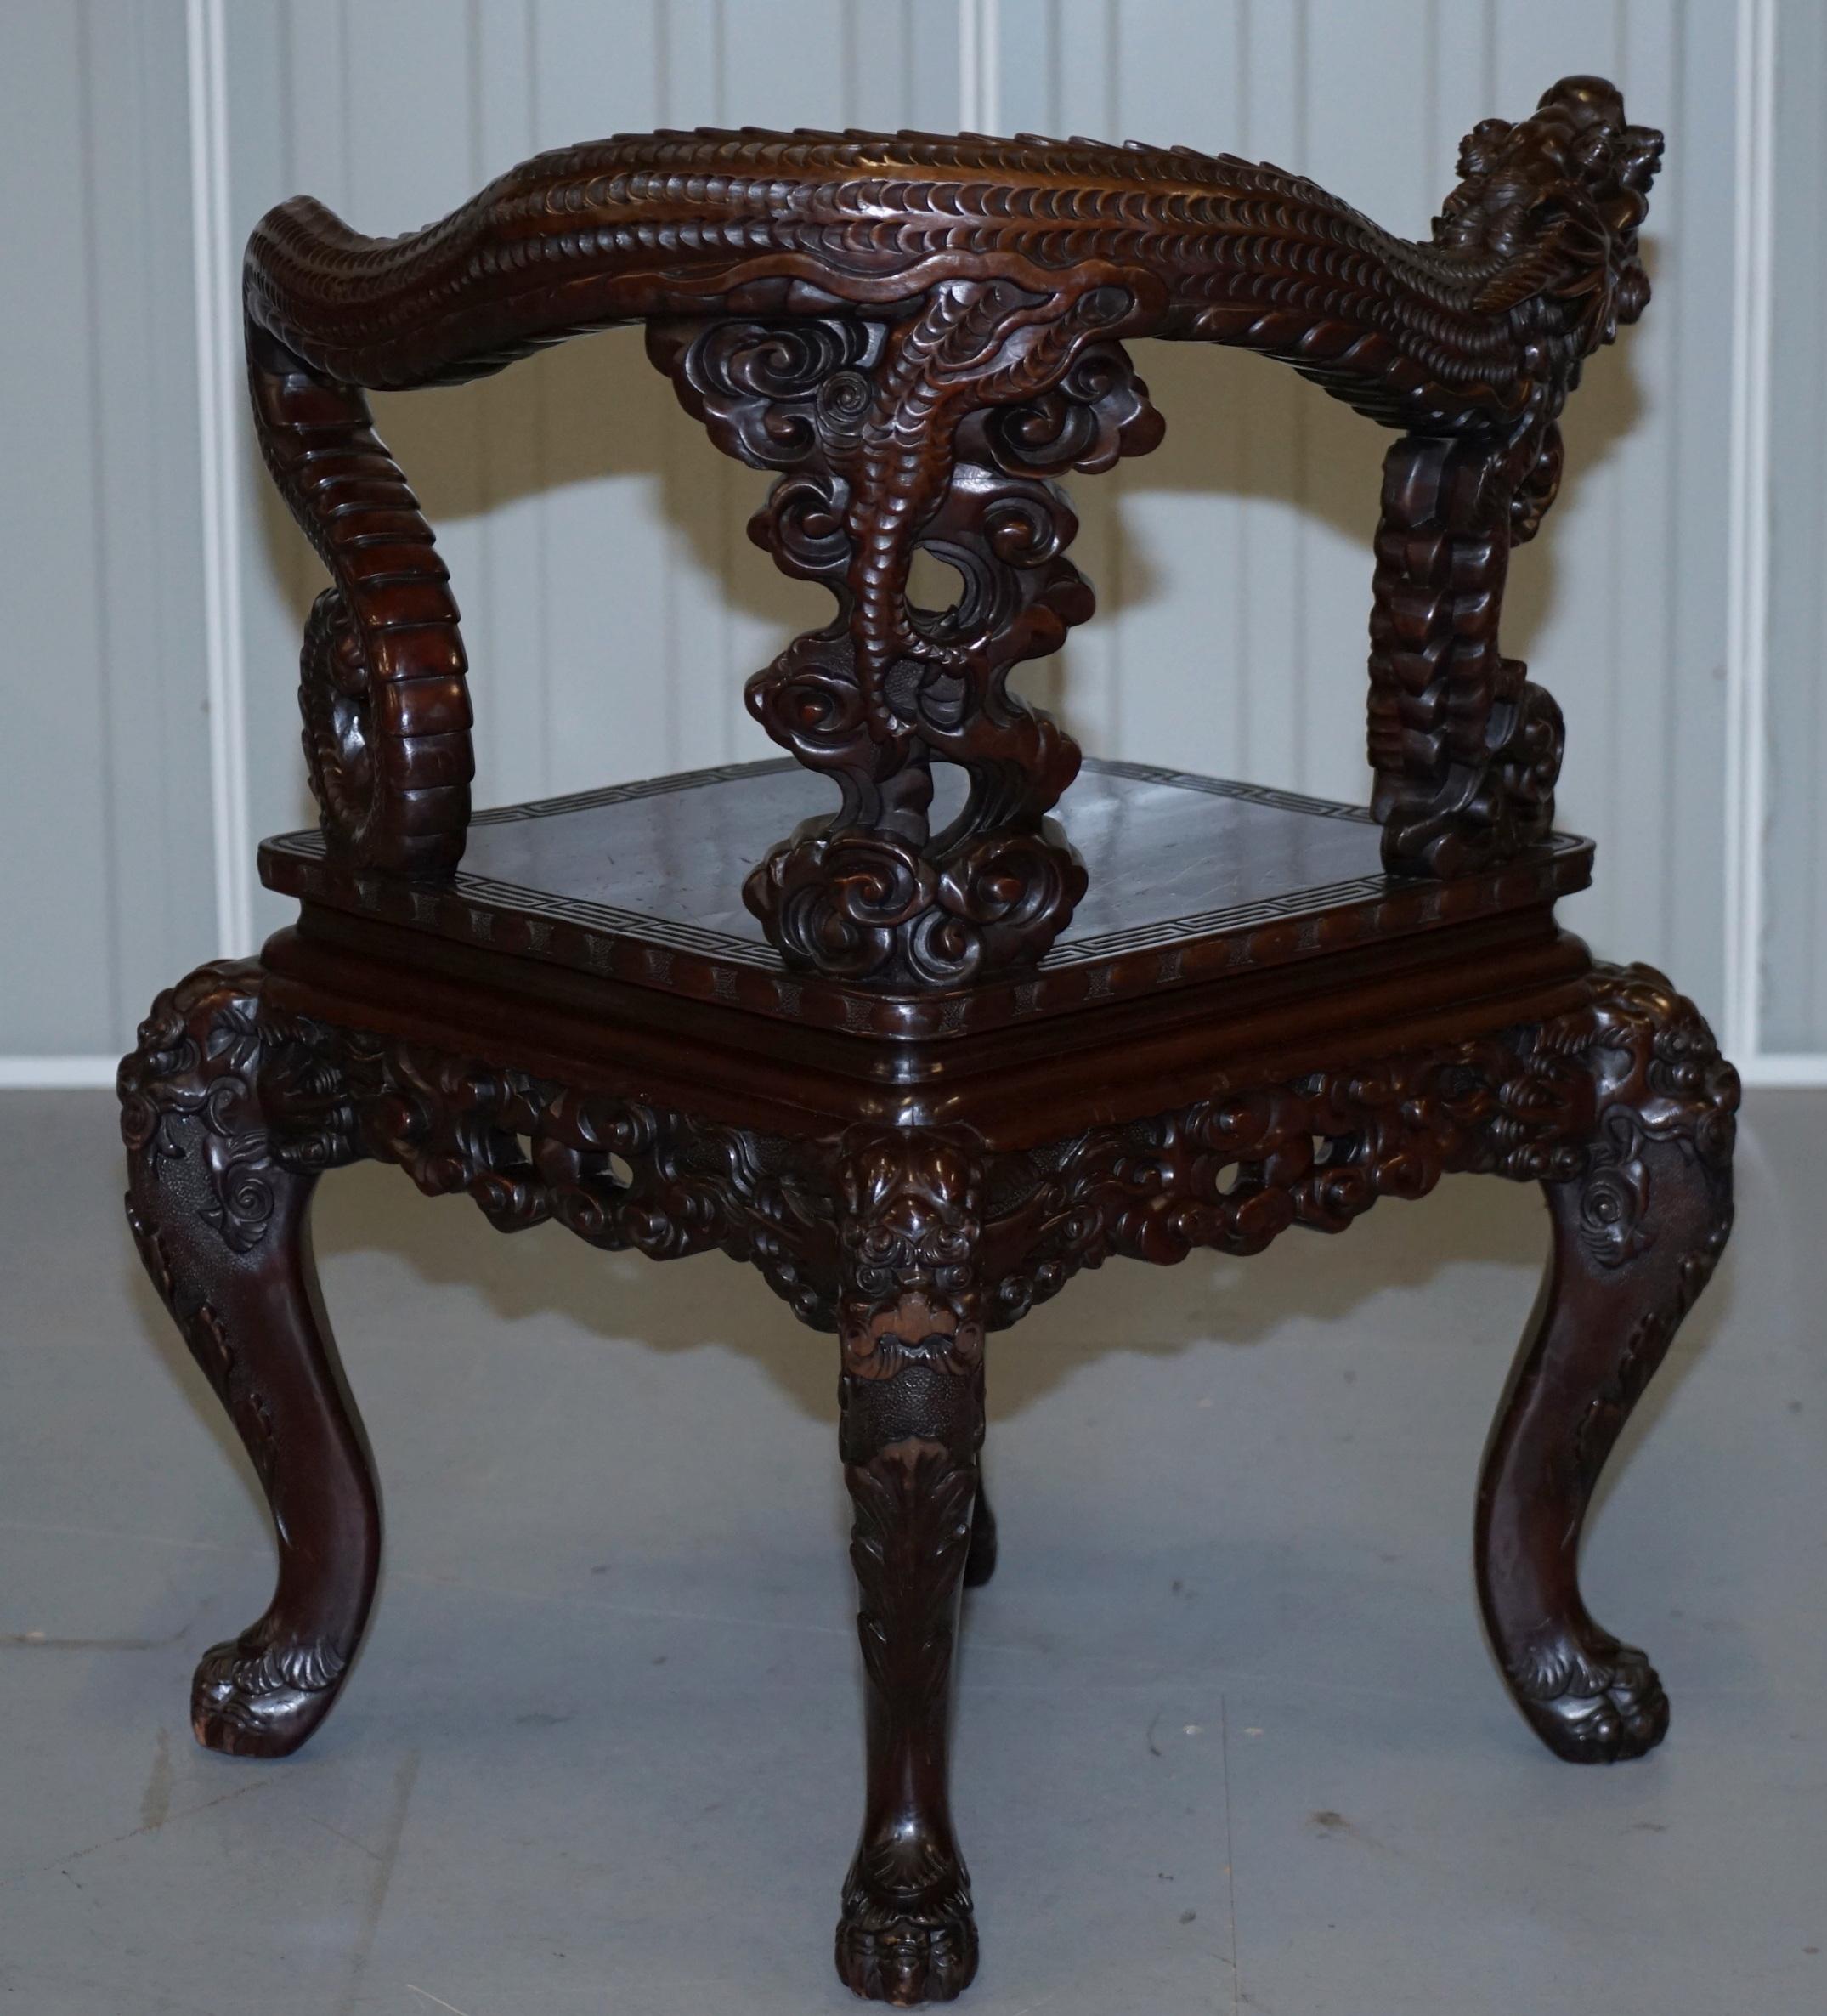 Stamped Japanese circa 1880 Qing Dynasty Carved Hardwood Dragon Corner Armchair For Sale 8